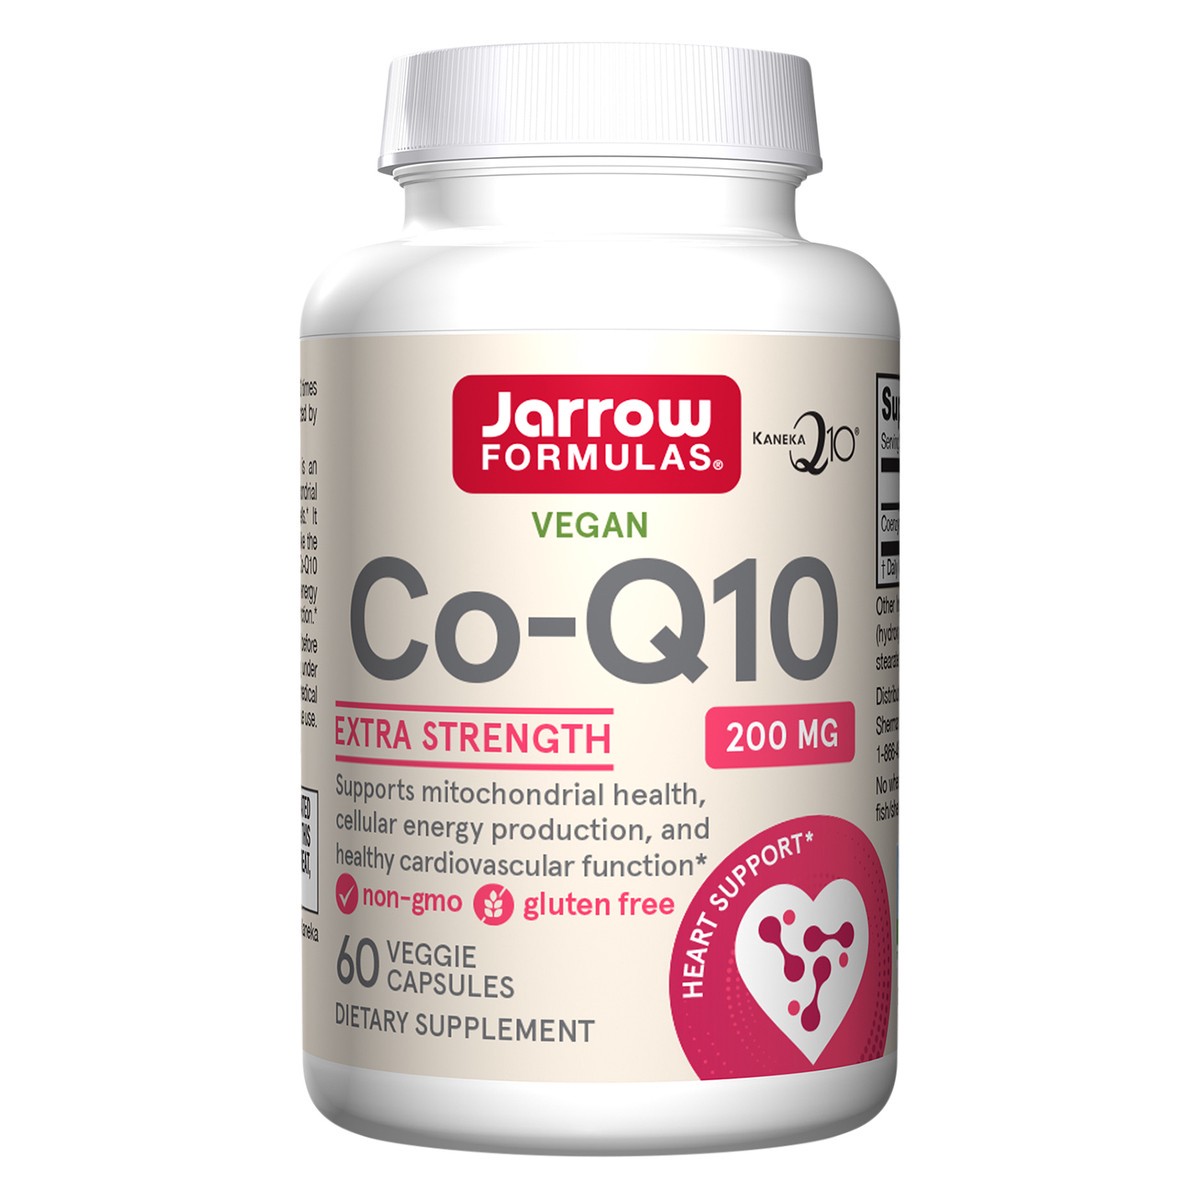 slide 1 of 4, Jarrow Formulas Co-Q10 200 mg - Antioxidant Support for Mitochondrial Health, Energy Production & Cardiovascular Function - Dietary Supplement - 60 Veggie Capsules, 60 ct